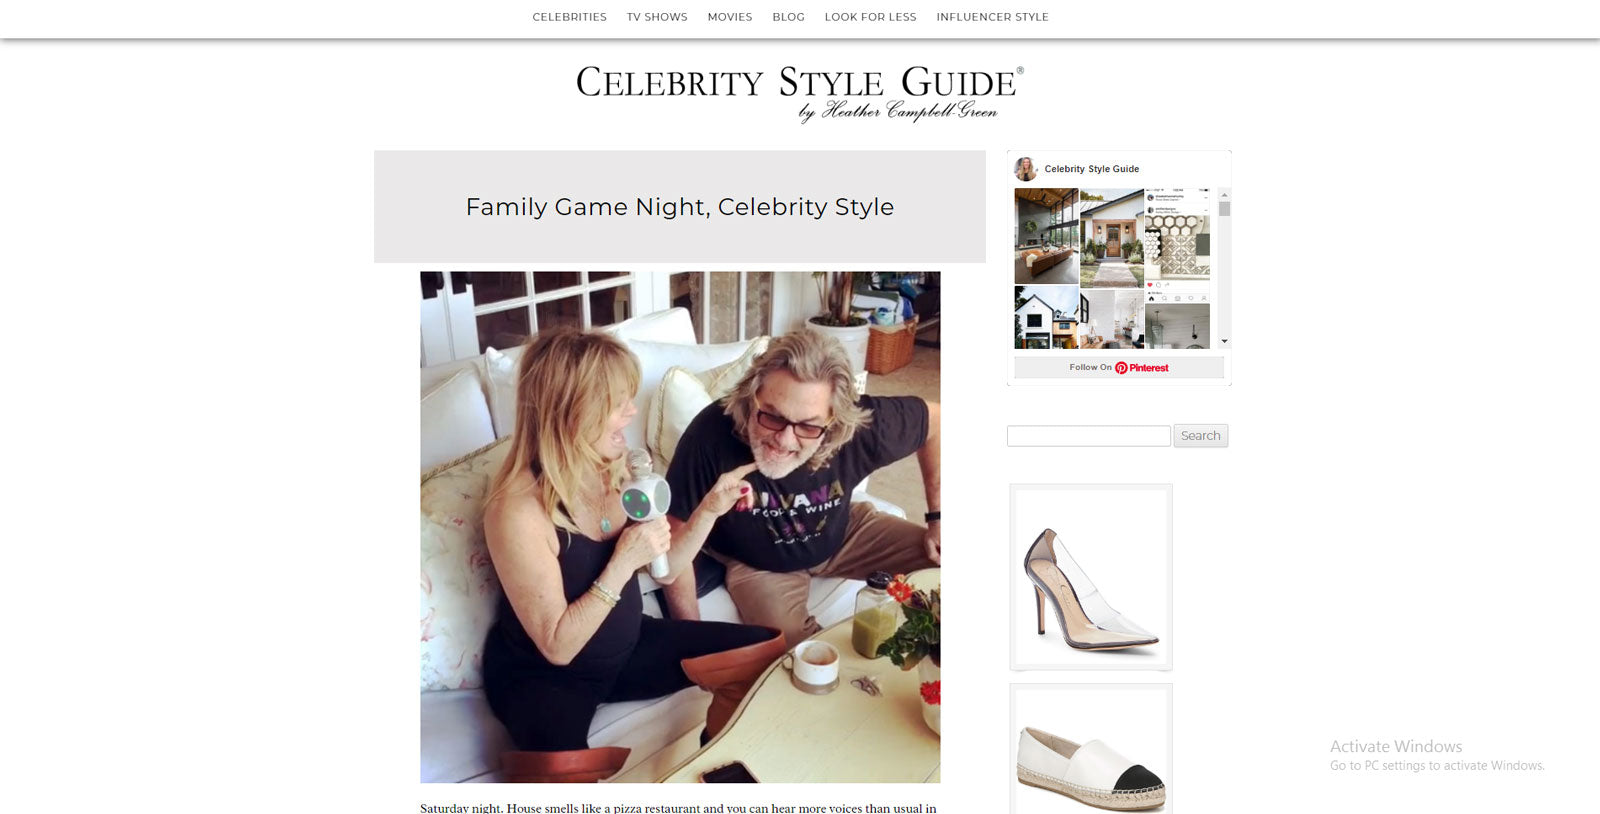 Celebrity Style Guide features Sing Along pro